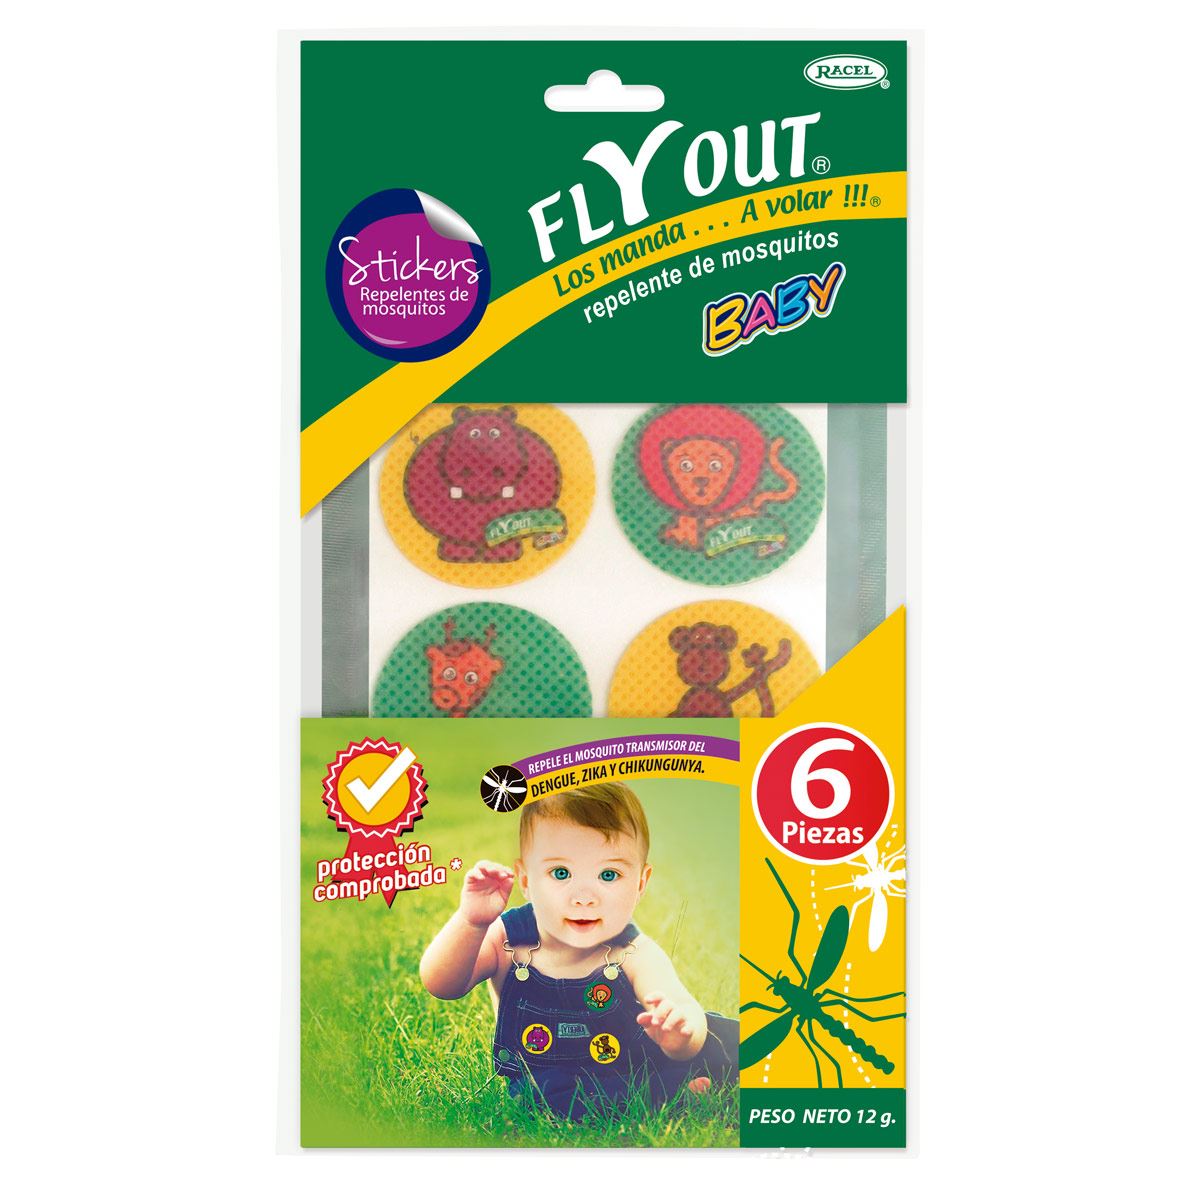 Fly Out Baby Repelente De Insectos Stickers